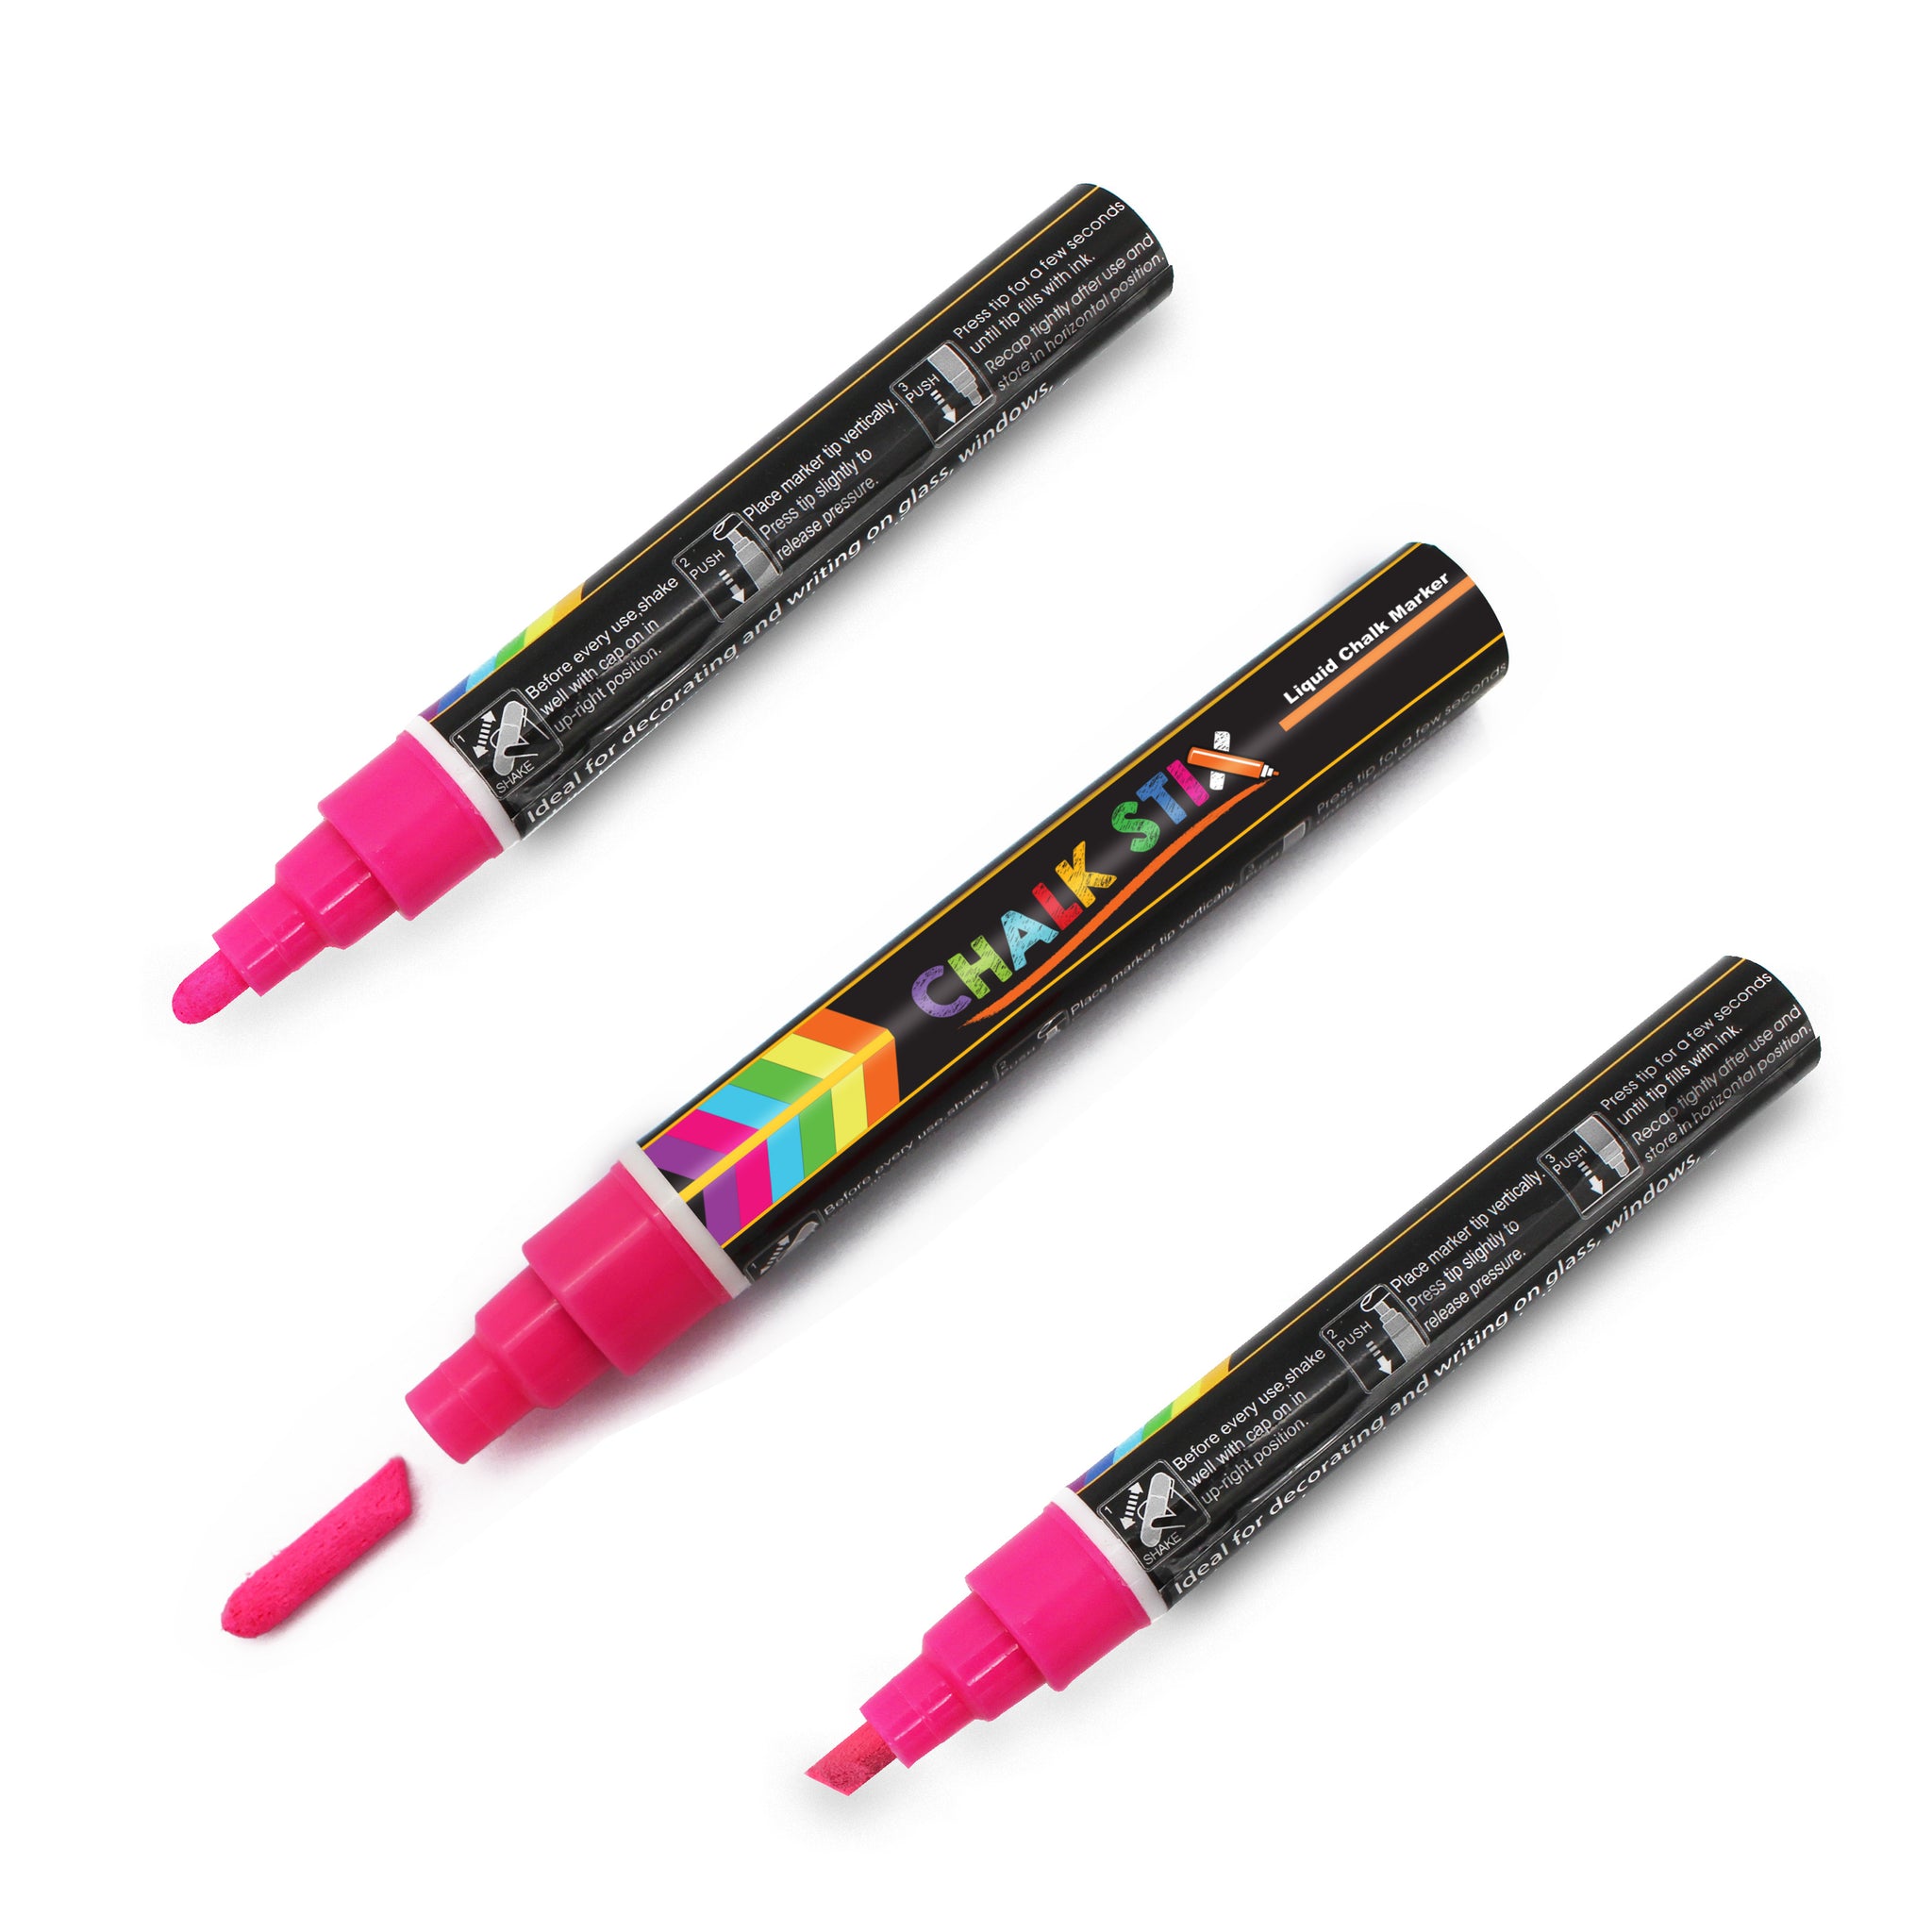 Neon Chalk Markers  Fine Tip Neon Chalk Markers for Chalkboards